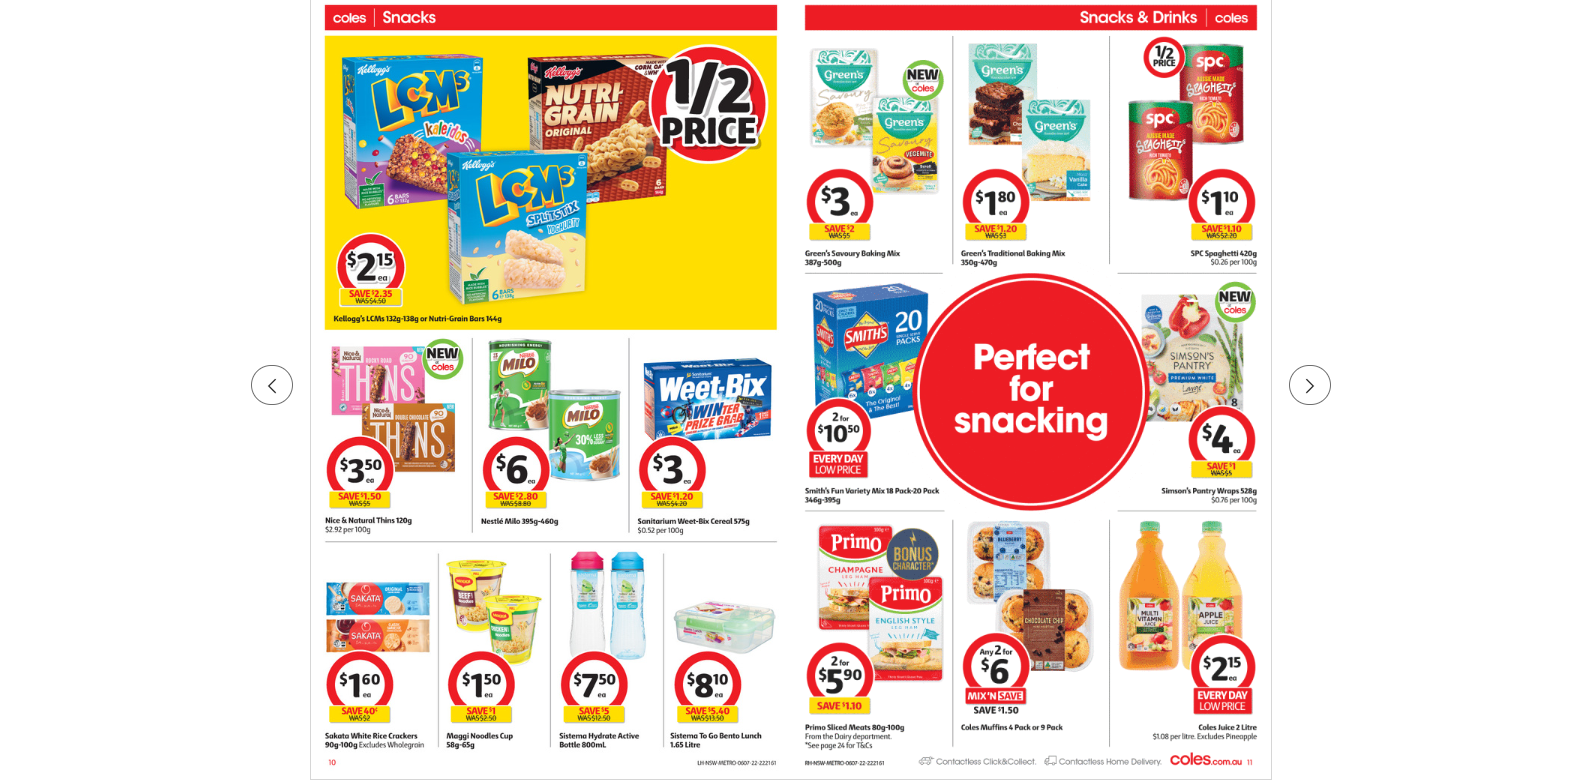 Coles this week's catalogue up to 50% OFF on groceries, beauty&everyday essentials(until 12th July)